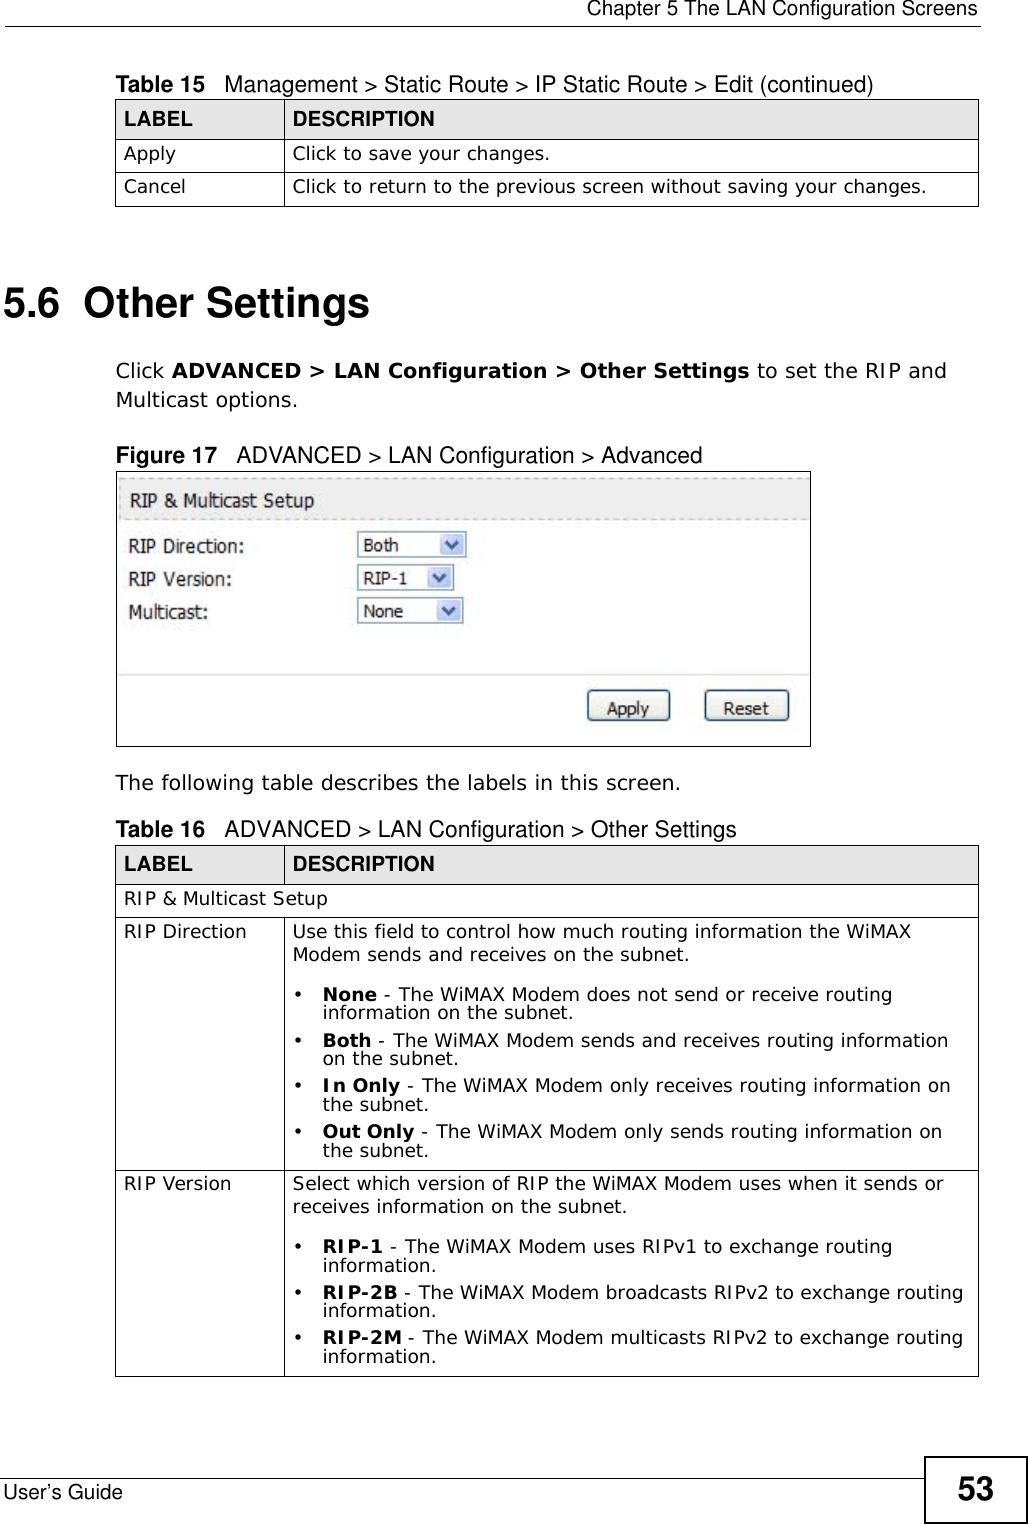  Chapter 5 The LAN Configuration ScreensUser’s Guide 535.6  Other SettingsClick ADVANCED &gt; LAN Configuration &gt; Other Settings to set the RIP and Multicast options.Figure 17   ADVANCED &gt; LAN Configuration &gt; AdvancedThe following table describes the labels in this screen.Apply Click to save your changes.Cancel Click to return to the previous screen without saving your changes.Table 15   Management &gt; Static Route &gt; IP Static Route &gt; Edit (continued)LABEL DESCRIPTIONTable 16   ADVANCED &gt; LAN Configuration &gt; Other SettingsLABEL DESCRIPTIONRIP &amp; Multicast SetupRIP Direction Use this field to control how much routing information the WiMAX Modem sends and receives on the subnet.•None - The WiMAX Modem does not send or receive routing information on the subnet.•Both - The WiMAX Modem sends and receives routing information on the subnet.•In Only - The WiMAX Modem only receives routing information on the subnet.•Out Only - The WiMAX Modem only sends routing information on the subnet.RIP Version Select which version of RIP the WiMAX Modem uses when it sends or receives information on the subnet.•RIP-1 - The WiMAX Modem uses RIPv1 to exchange routing information.•RIP-2B - The WiMAX Modem broadcasts RIPv2 to exchange routing information.•RIP-2M - The WiMAX Modem multicasts RIPv2 to exchange routing information.